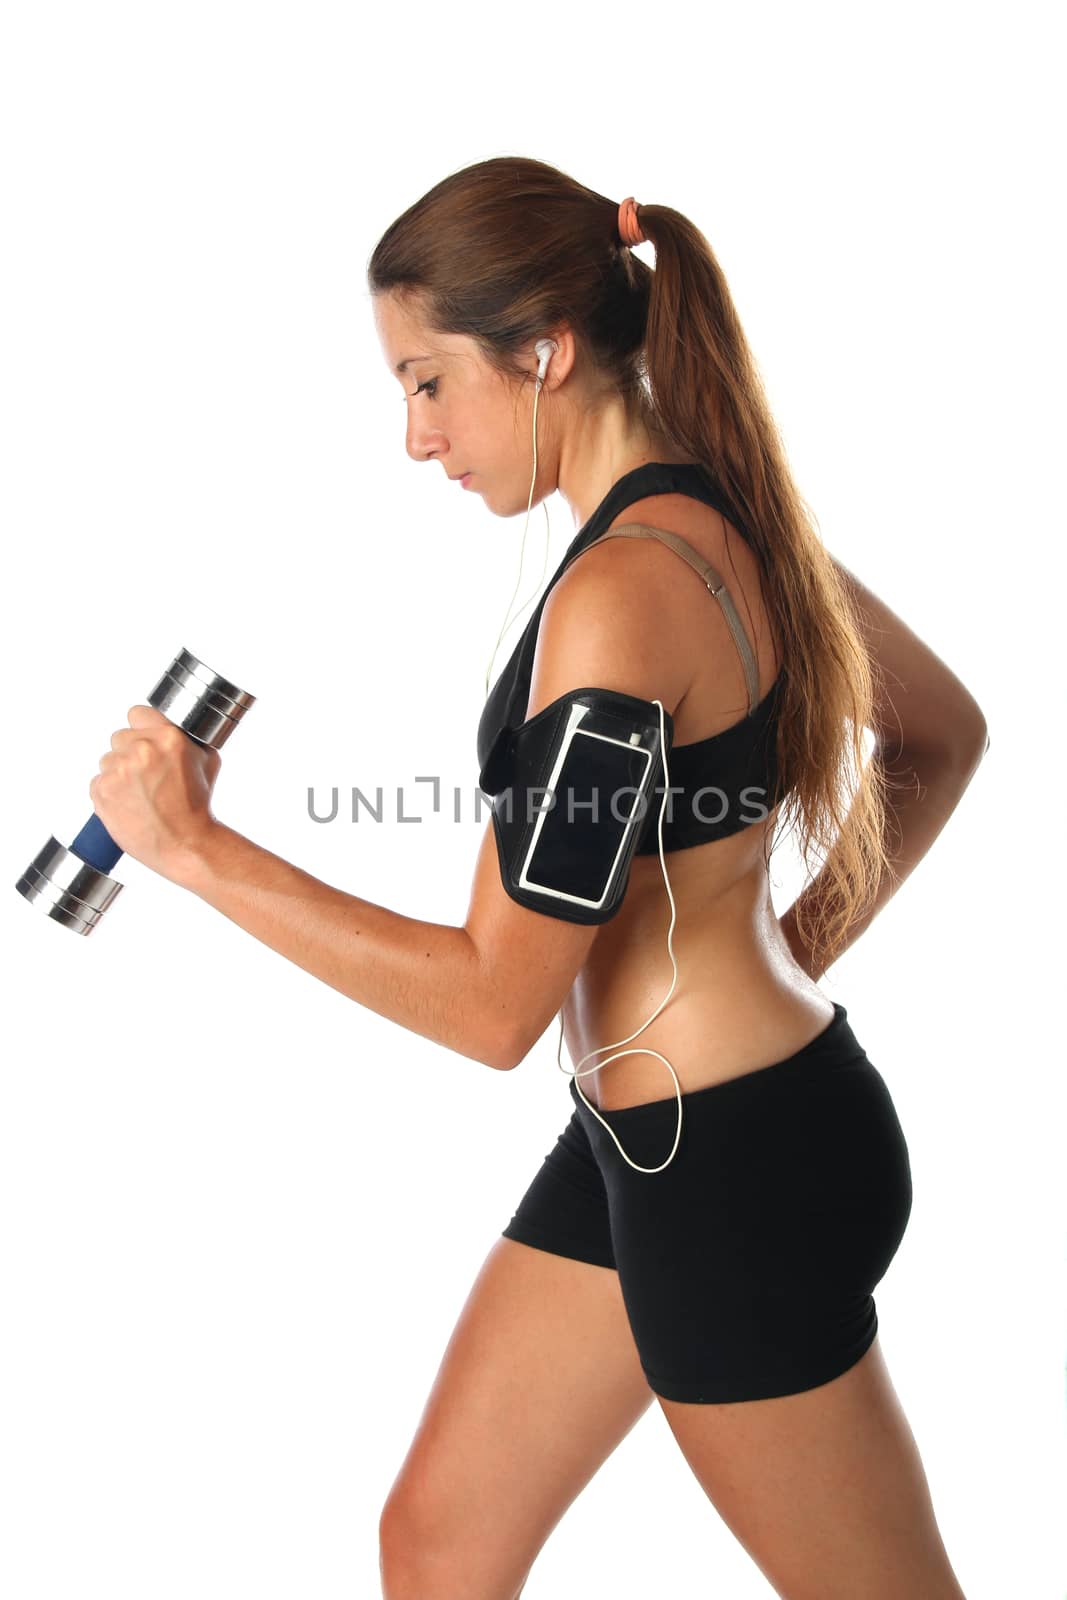 Young woman exercising with dumbbells and a smartphone. by Erdosain